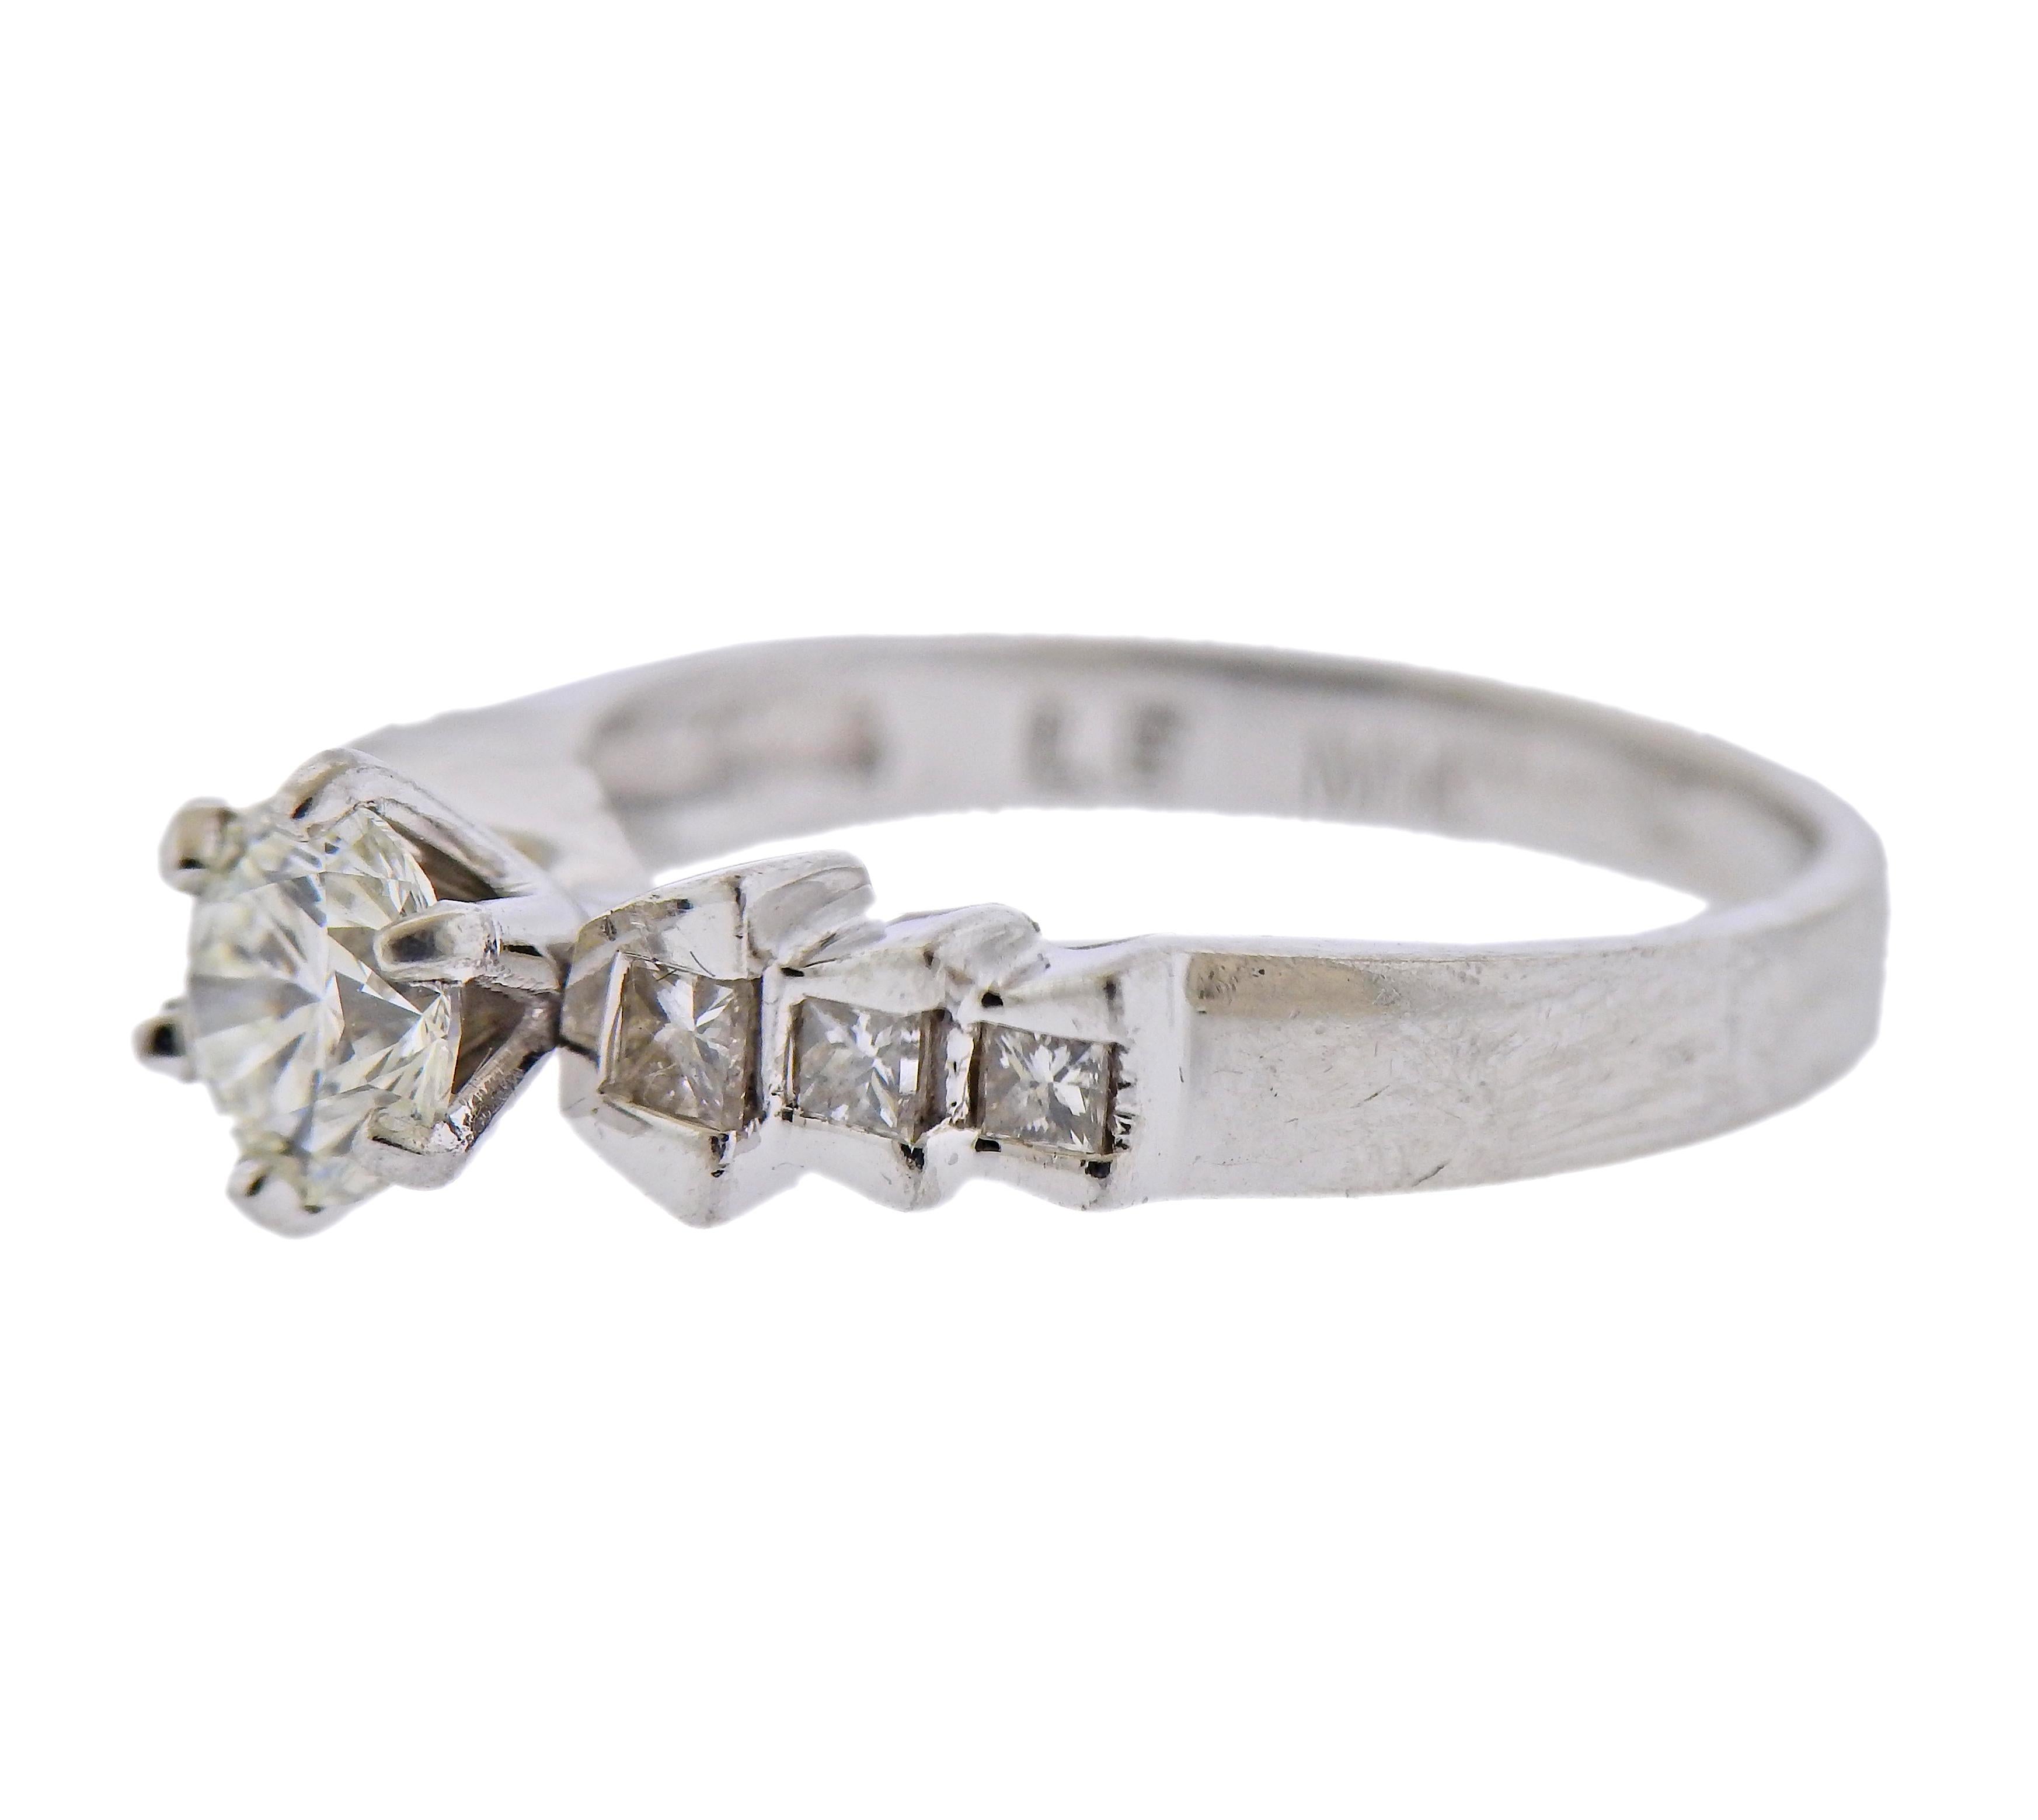 Platinum engagement ring with center approx. 0.75ct H-I/VS1-VS2 round brilliant stone, and approx. 0.26cts in princess cut stones on sides. Ring size 7.25. Marked: Plat, LE MK. Weight - 6.4 grams. 